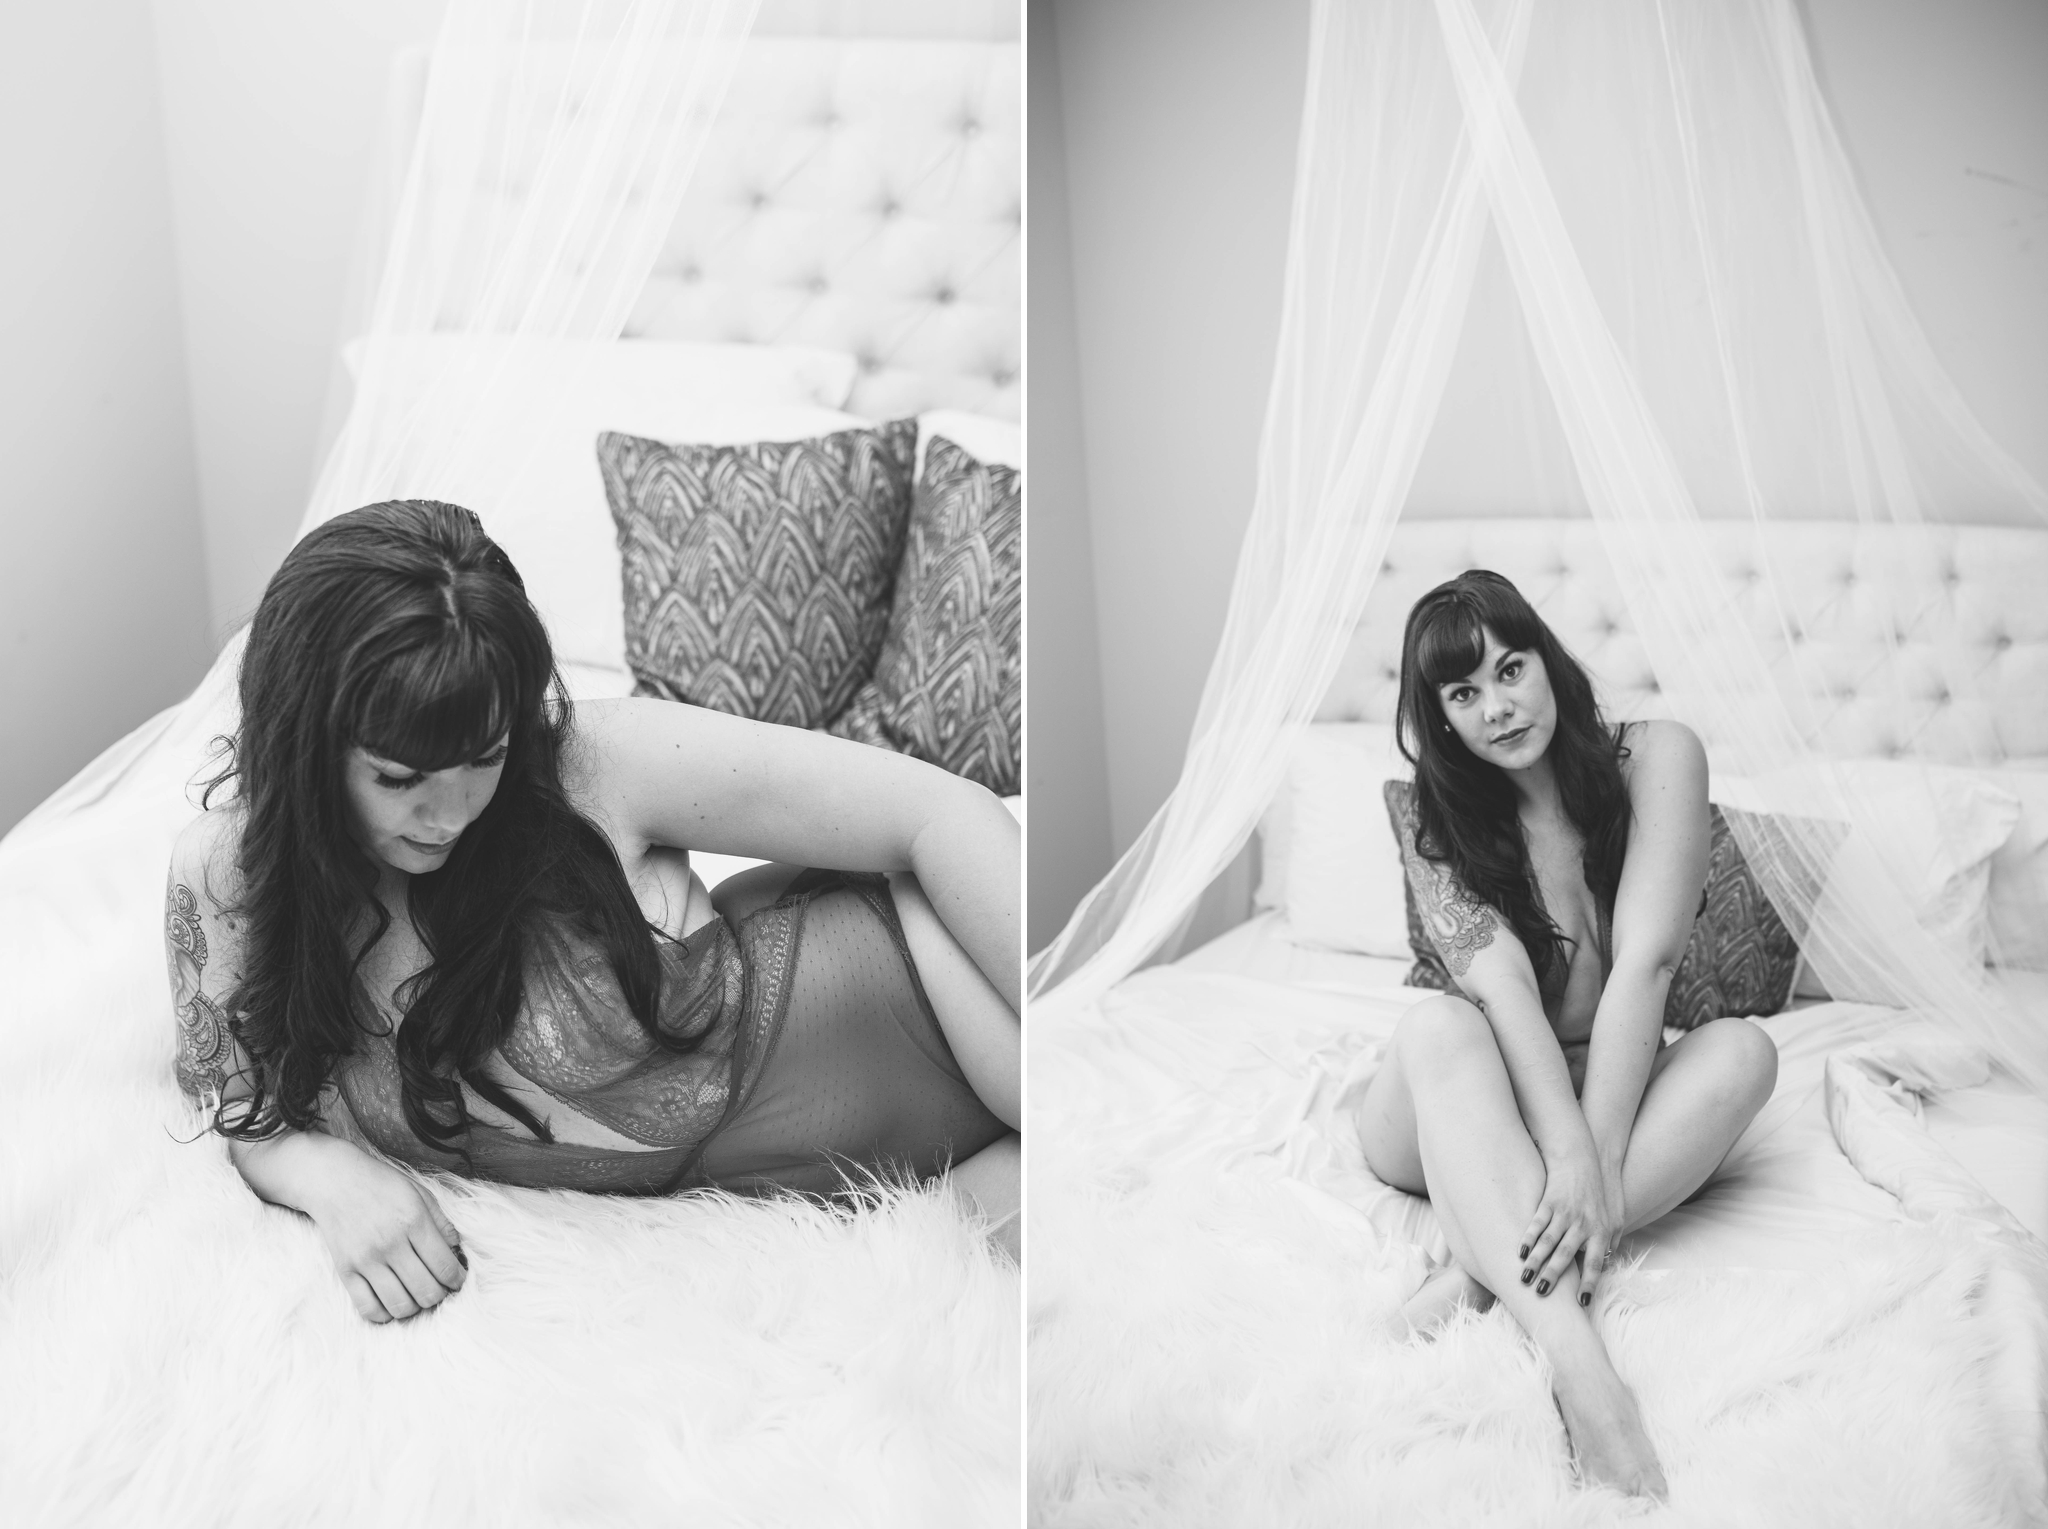 Fifty Shades of Grey Inspired Boudoir Photography Session - Fayetteville North Carolina Photographer